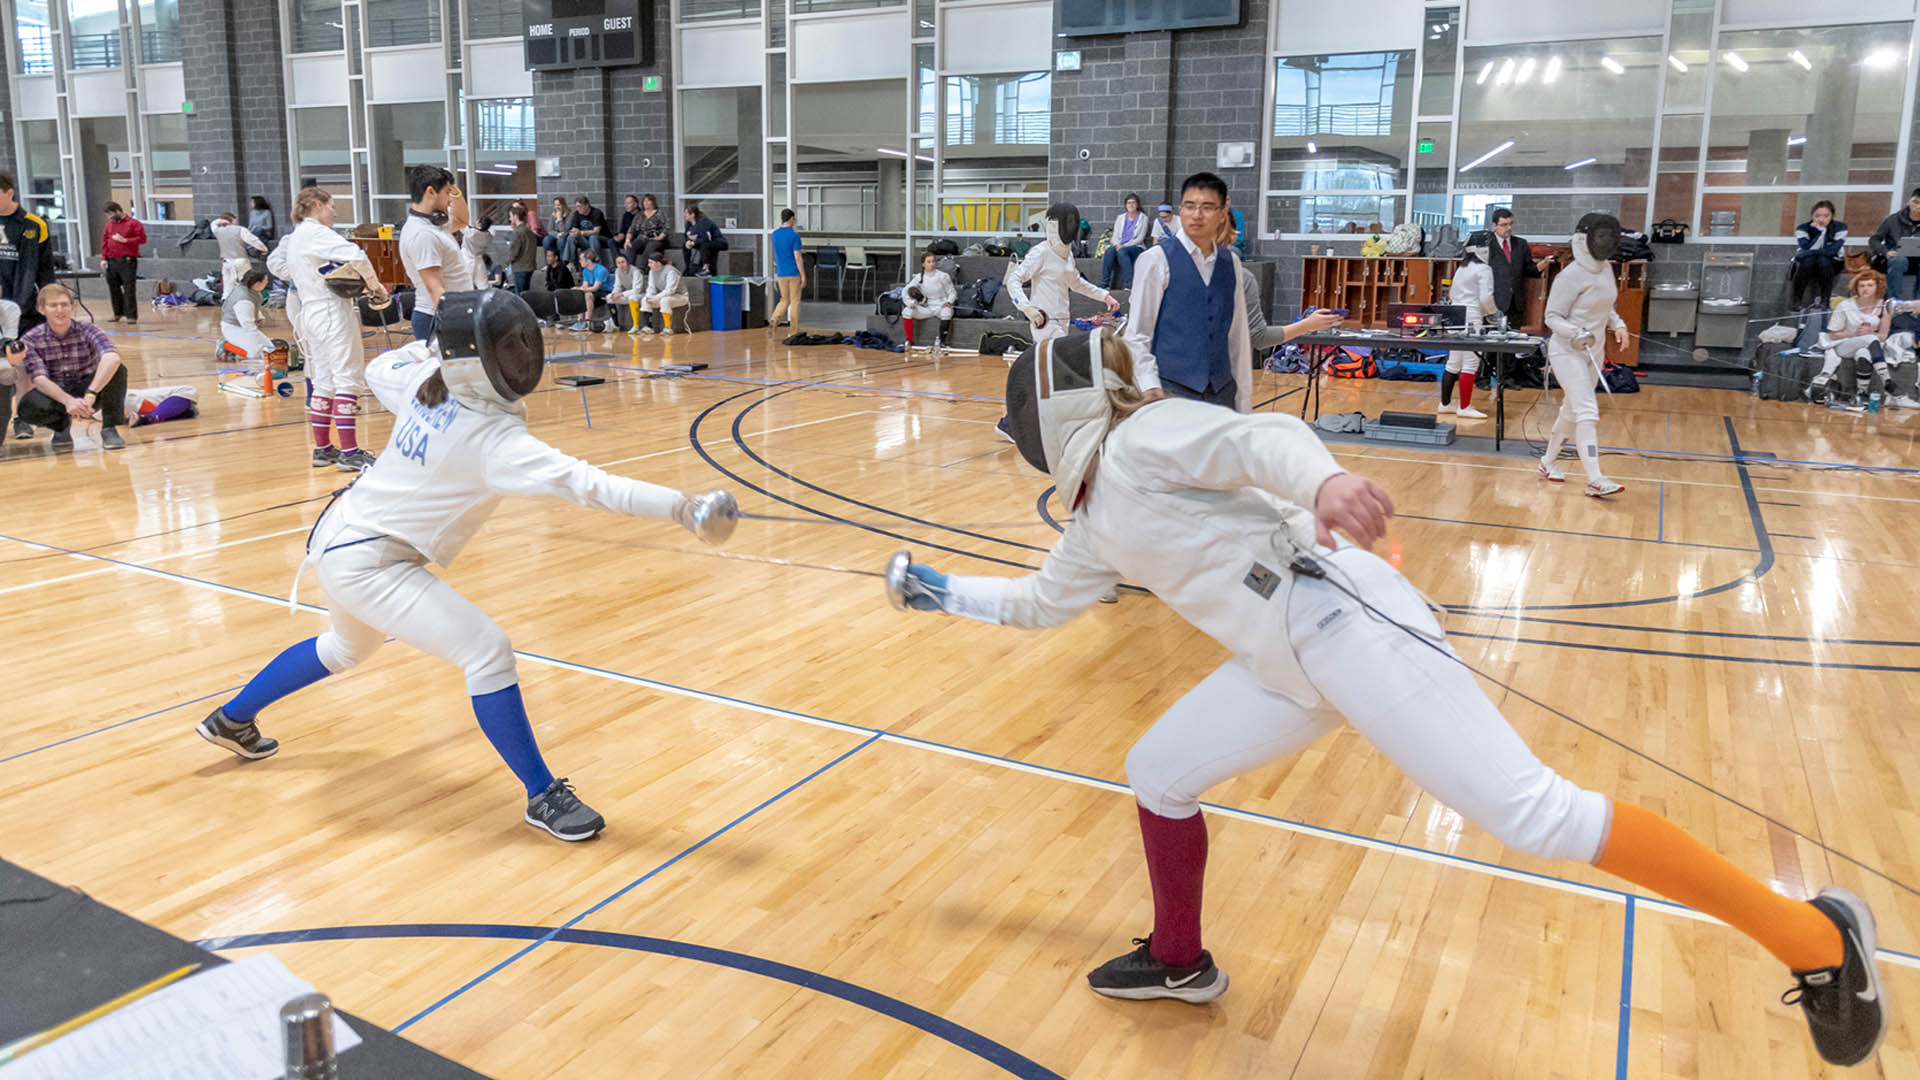 Collegiate club teams compete in a fencing tournament at the Kaplan Center.